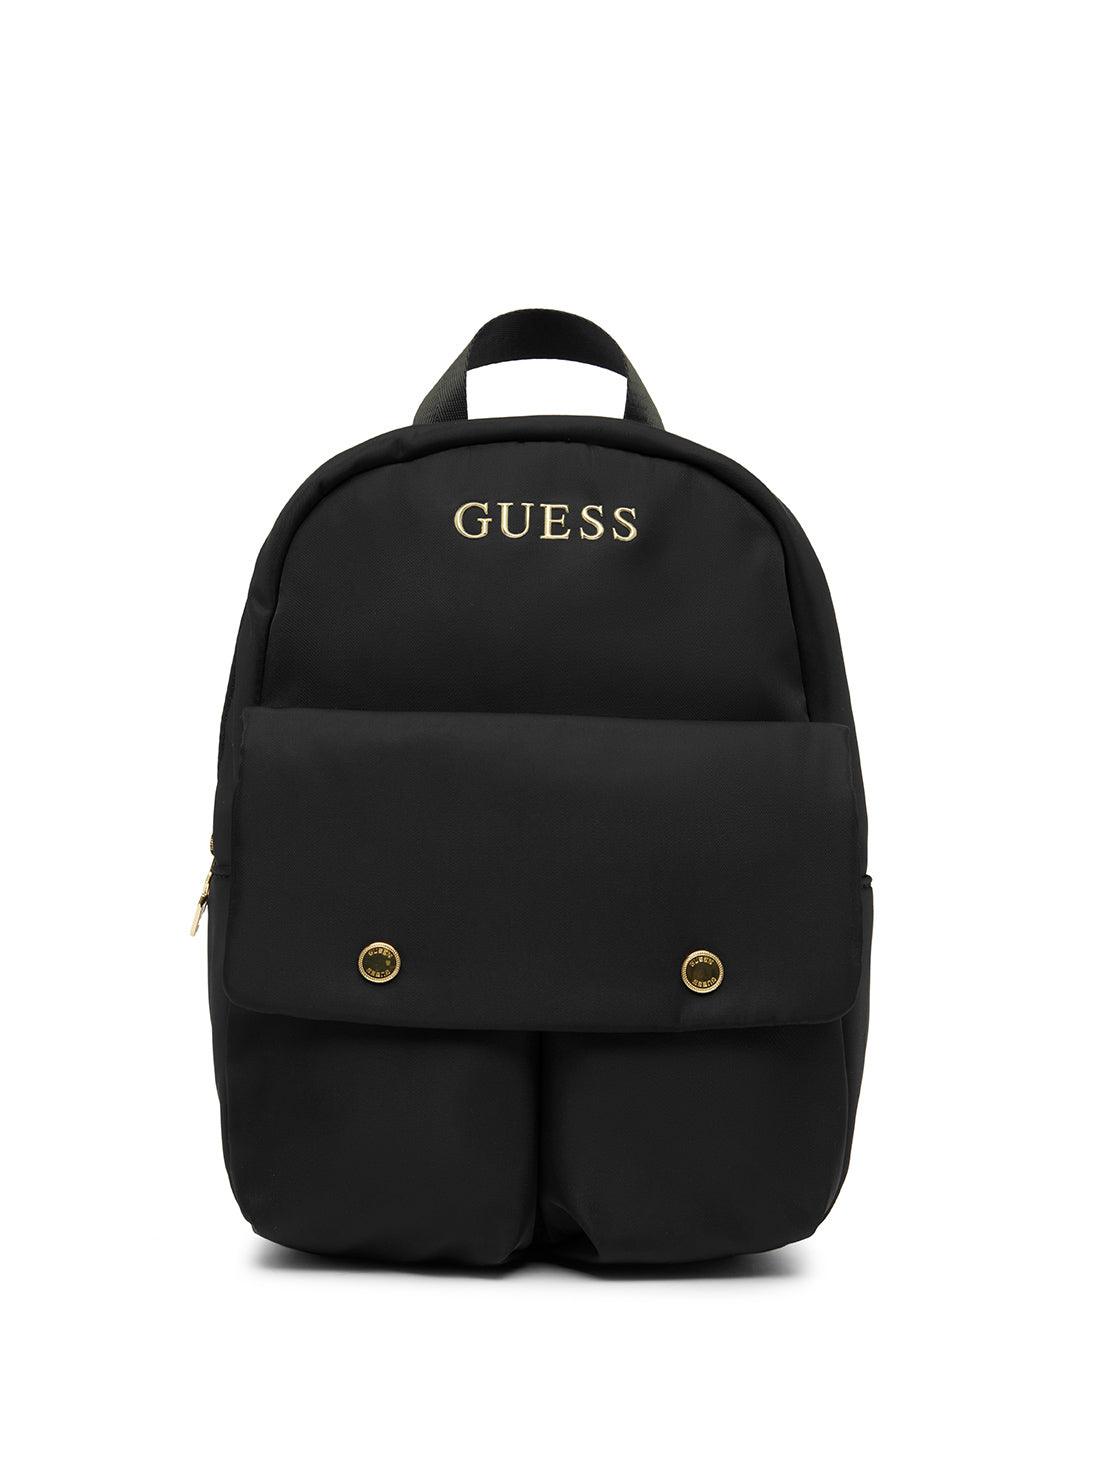 Black Active Backpack | GUESS Women's Handbags | front view